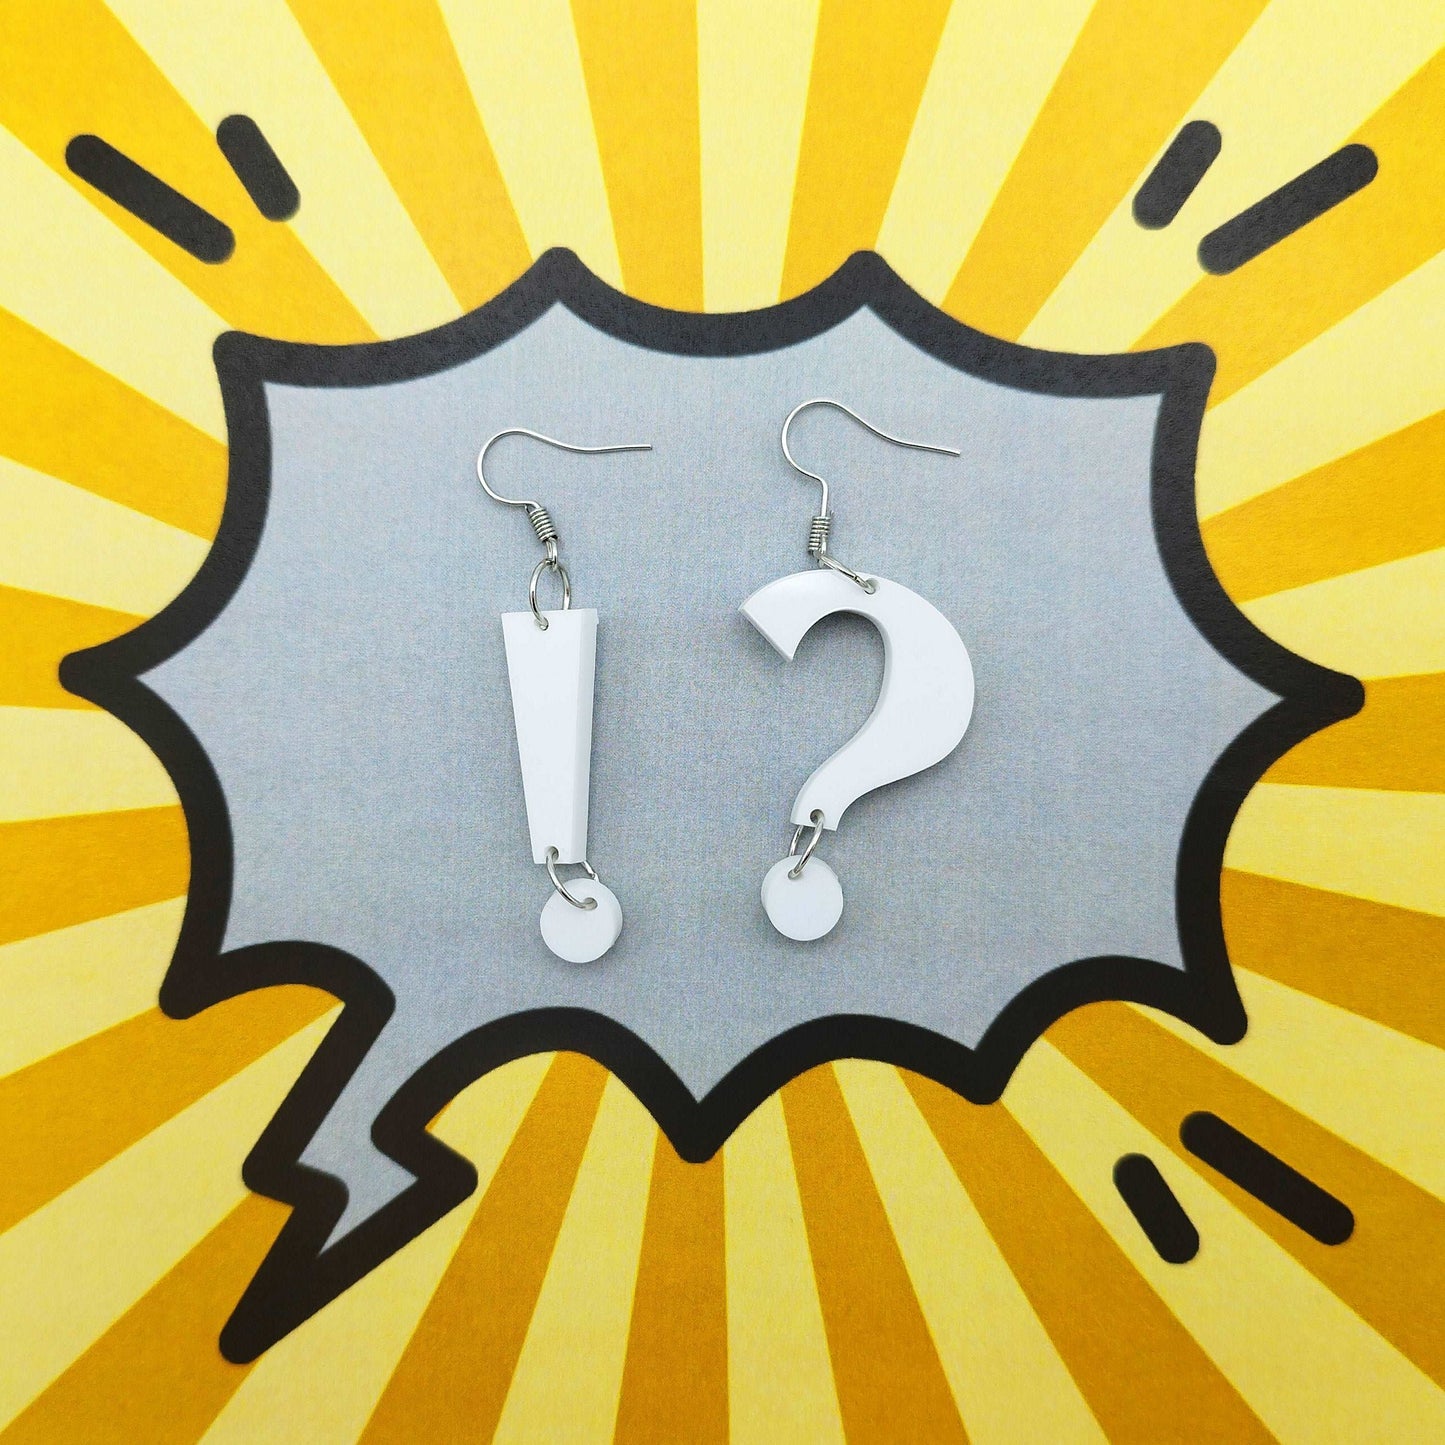 Mismatched Earrings Question and exclamation mark_Cover